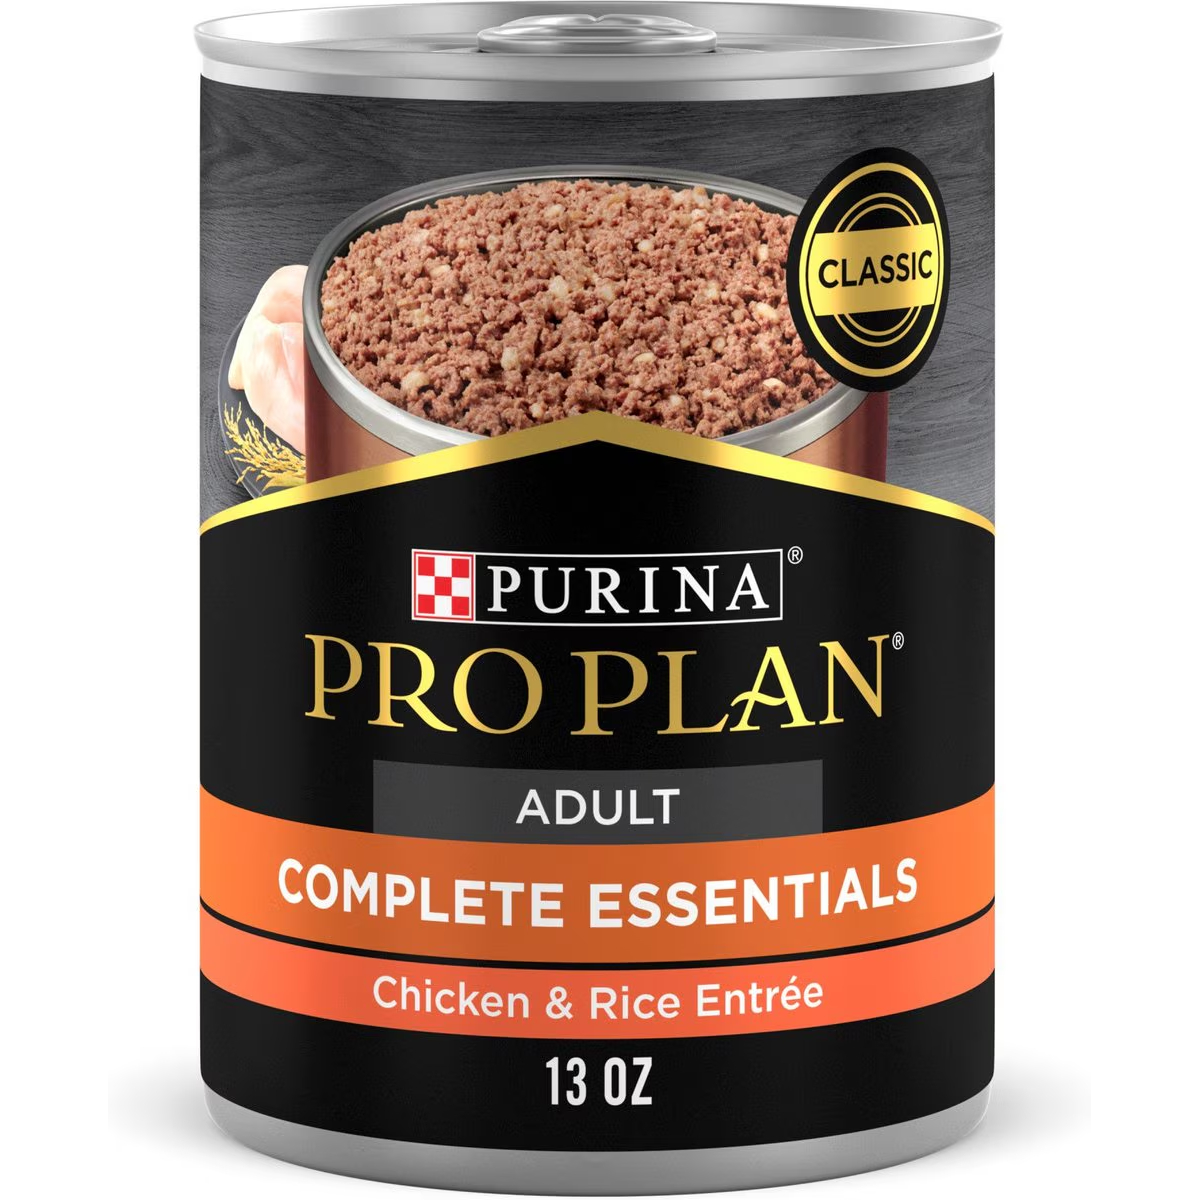 Purina Pro Plan Complete Essentials Adult Dog Canned Food